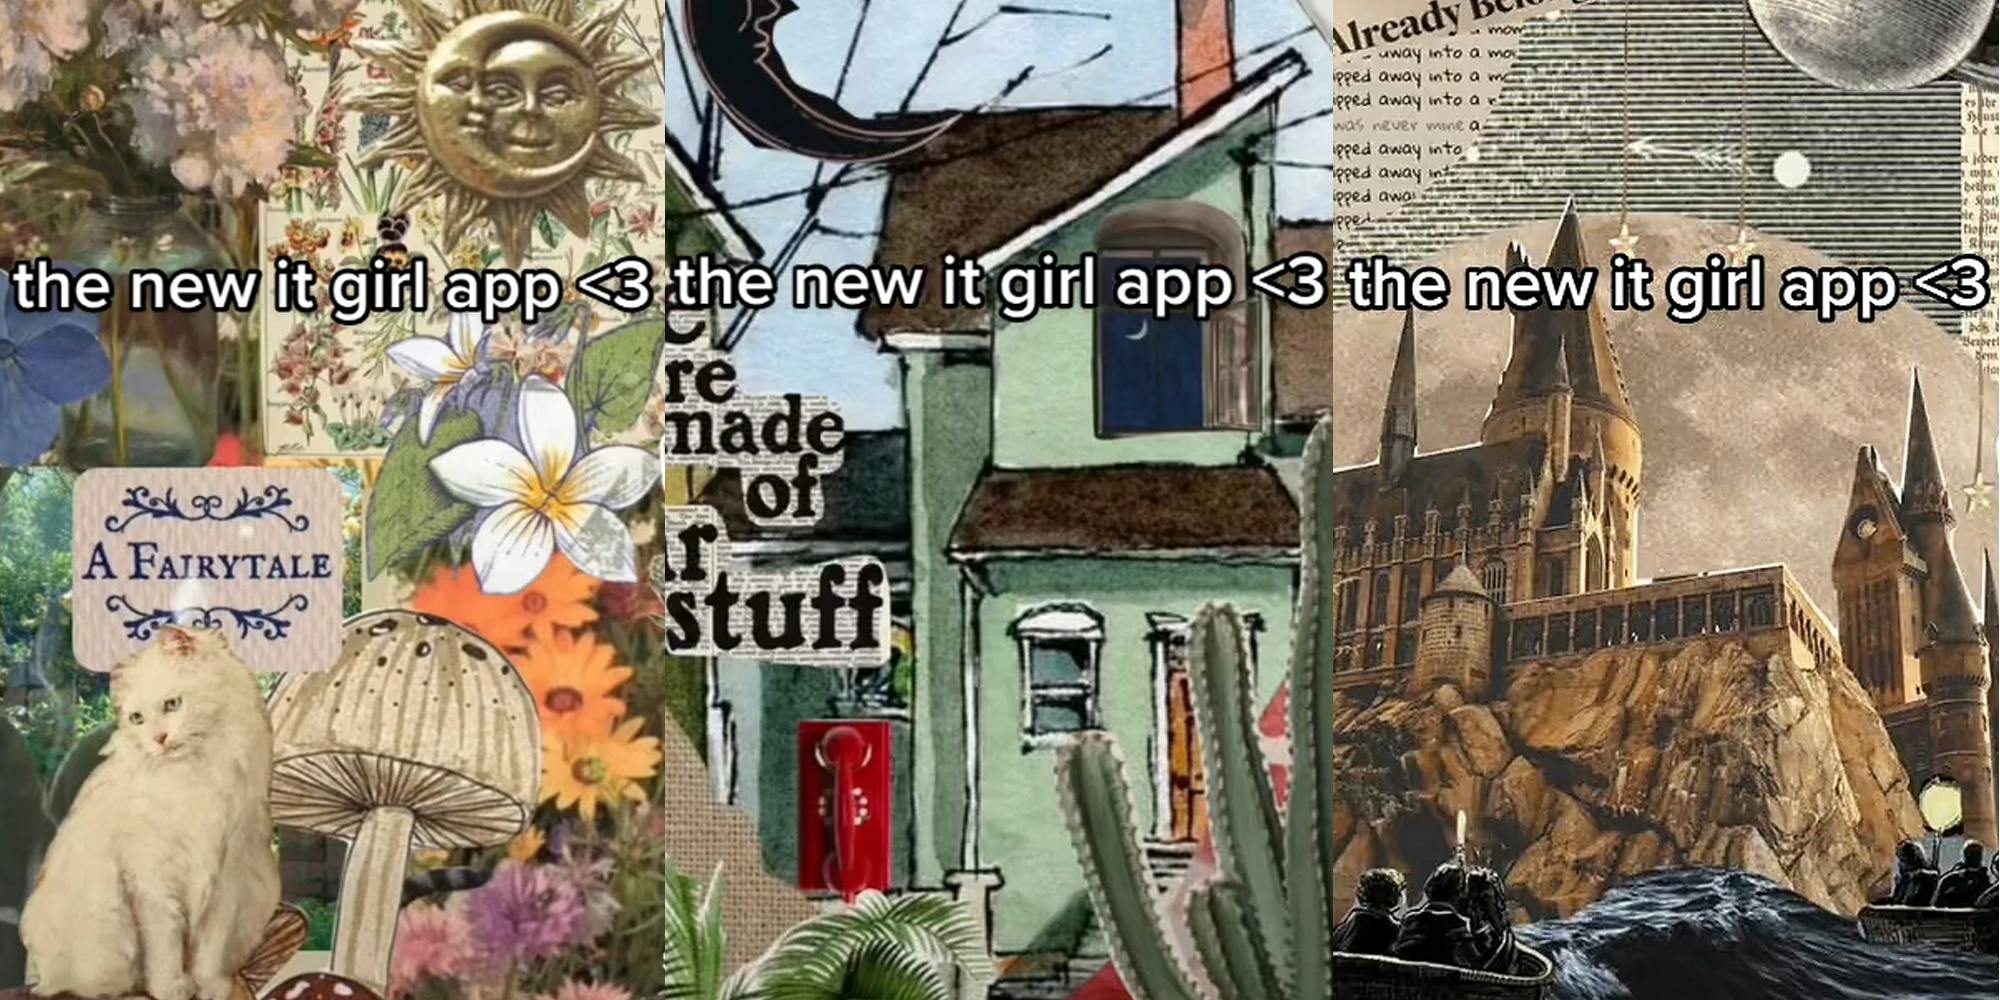 Shuffles collage with cat mushroom flowers and sun with moon caption "the new it girl app